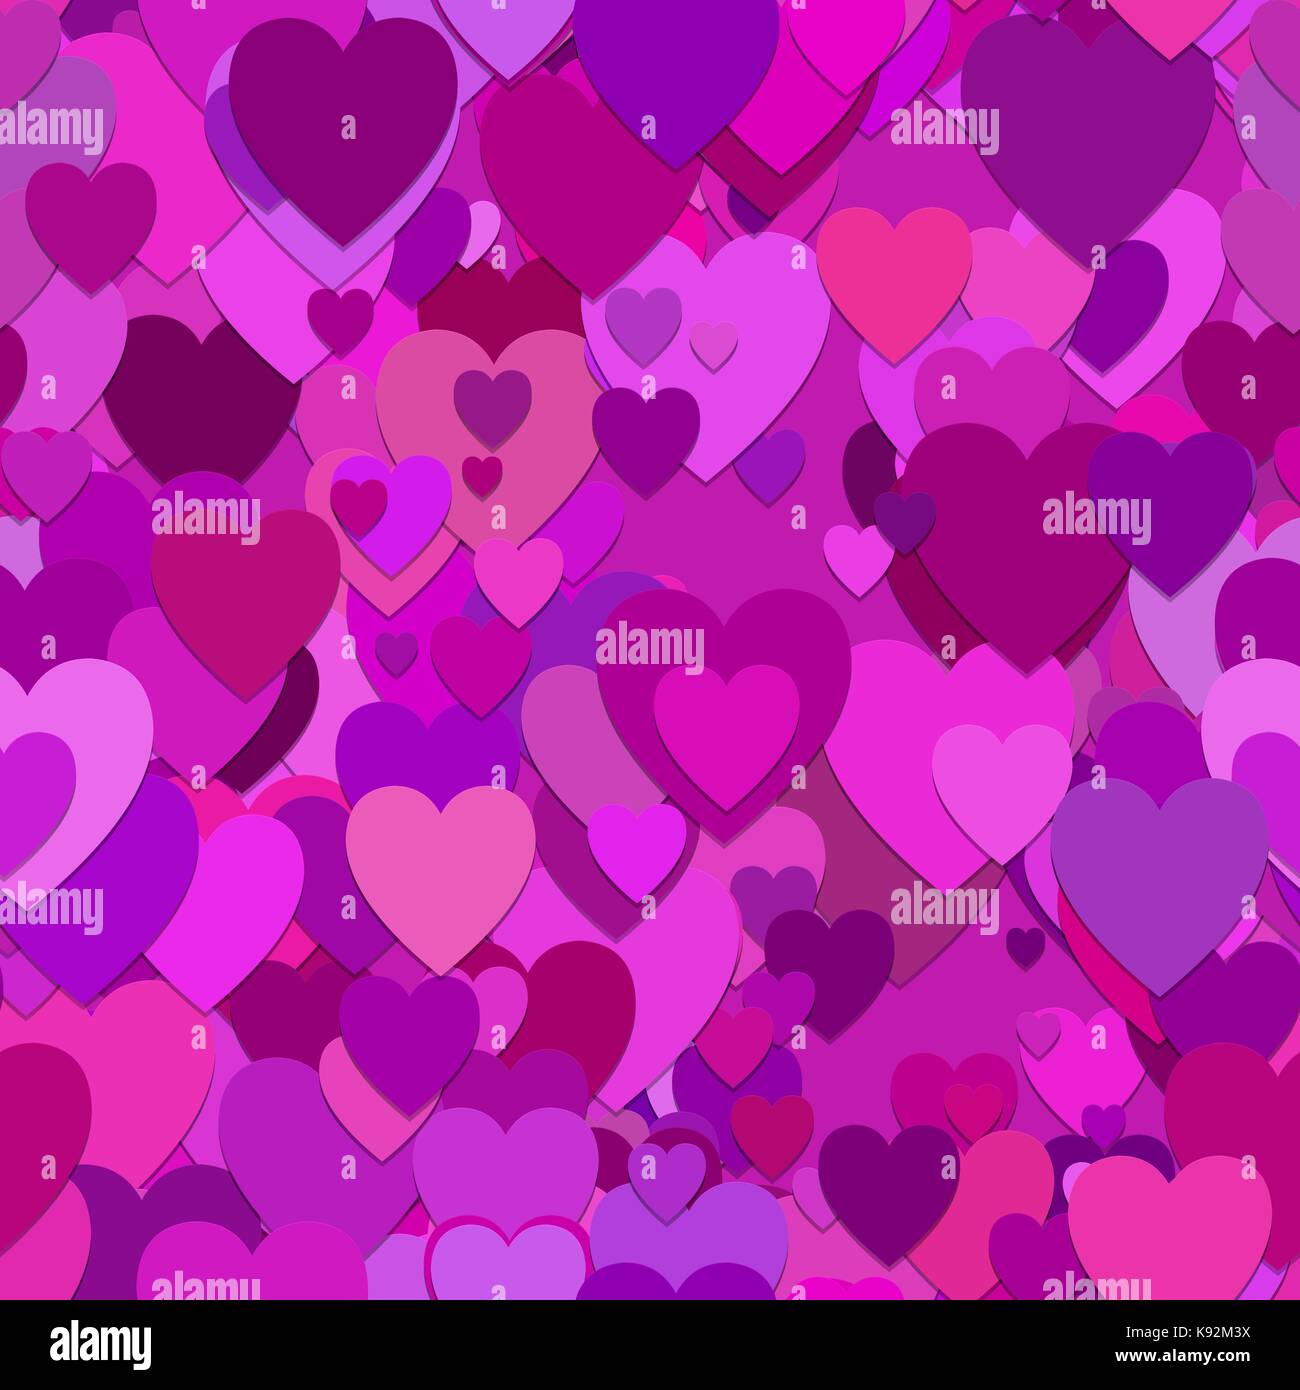 Repeating random valentines day background pattern - vector illustration from purple hearts Stock Vector